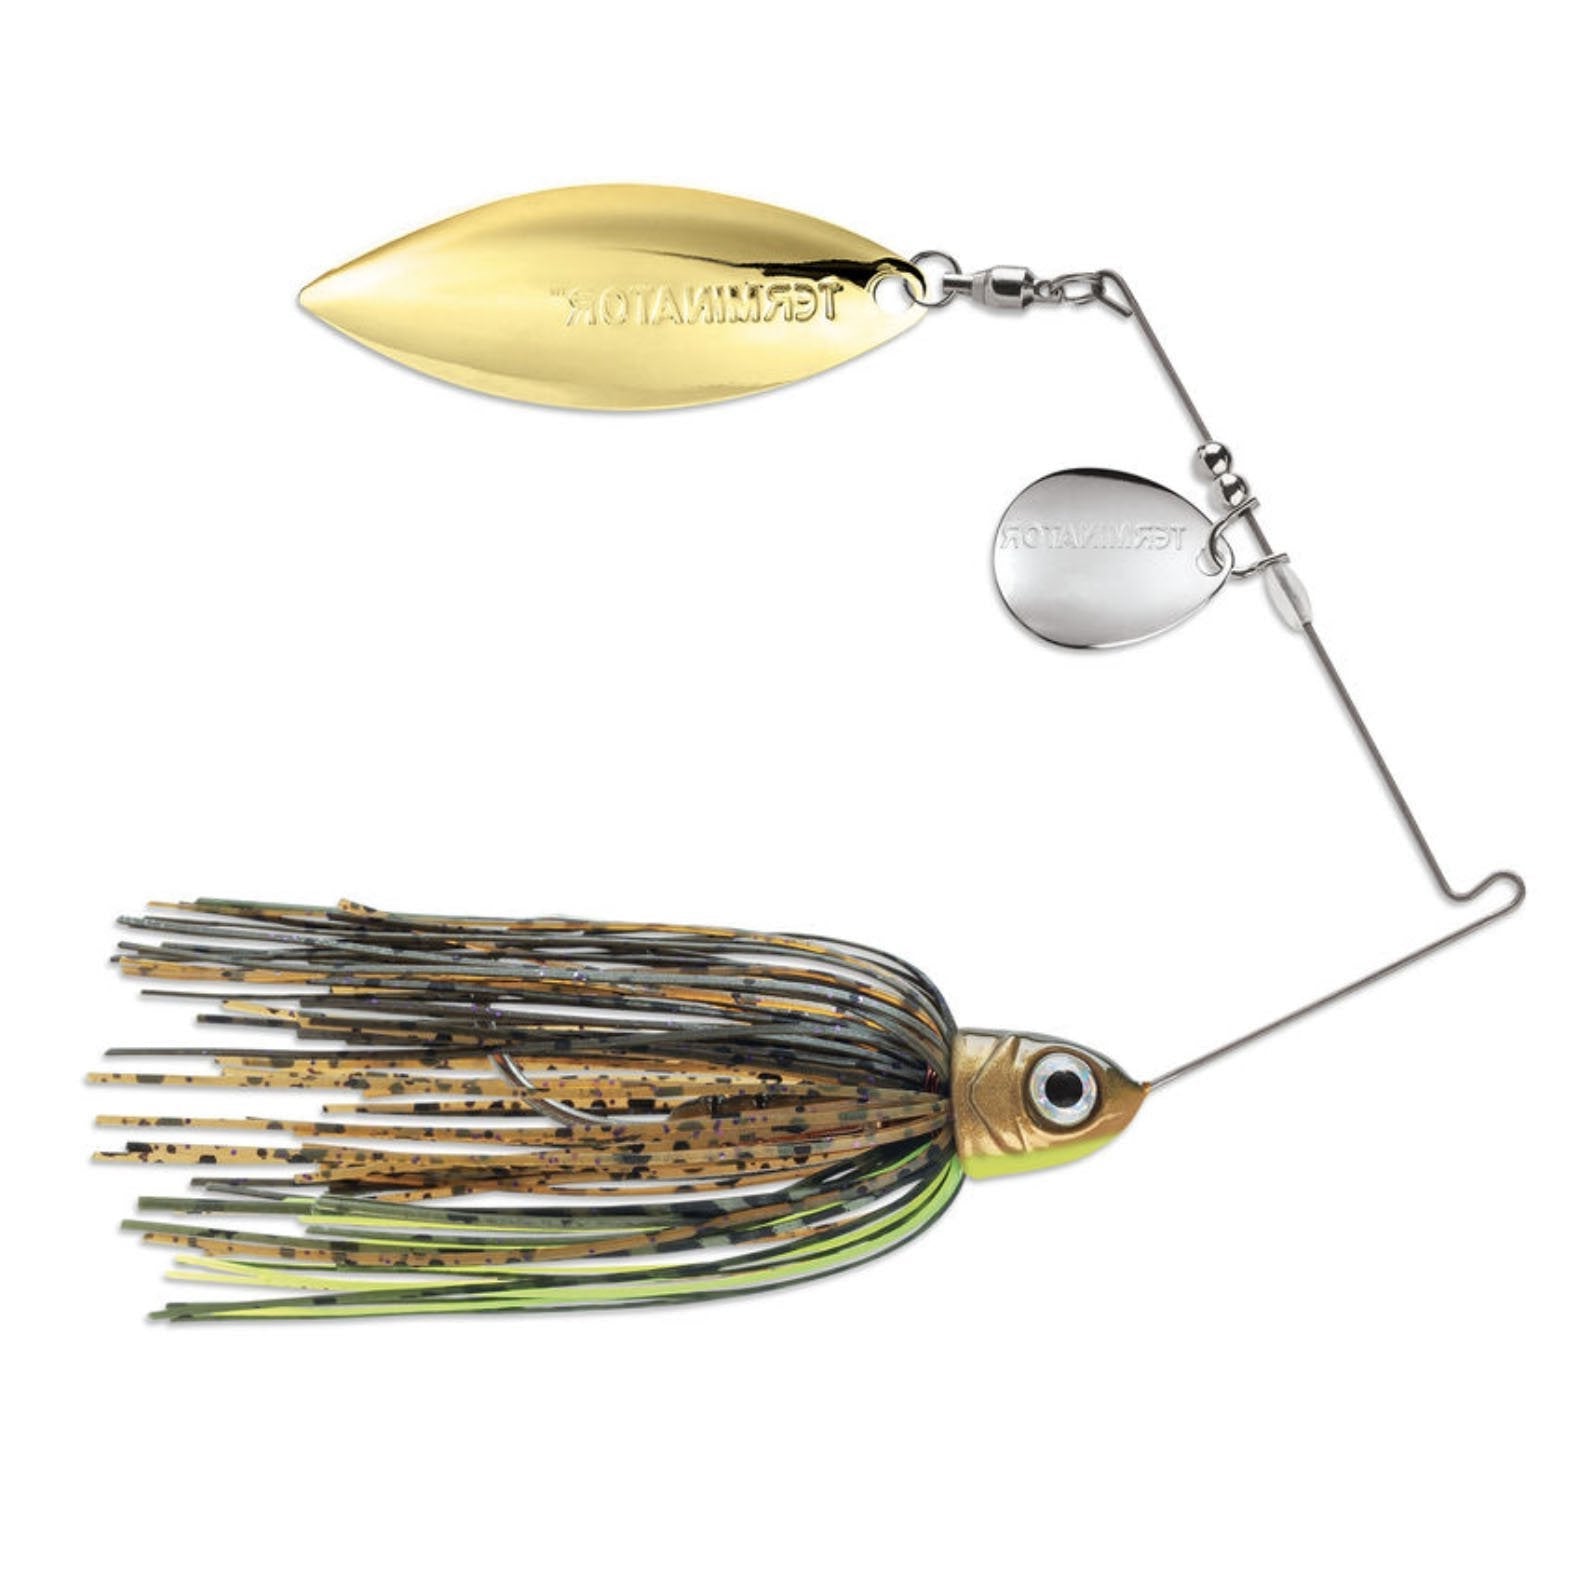 Terminator PSS38CW116NG Pro Series 3/8 oz. Sunny Spinnerbait